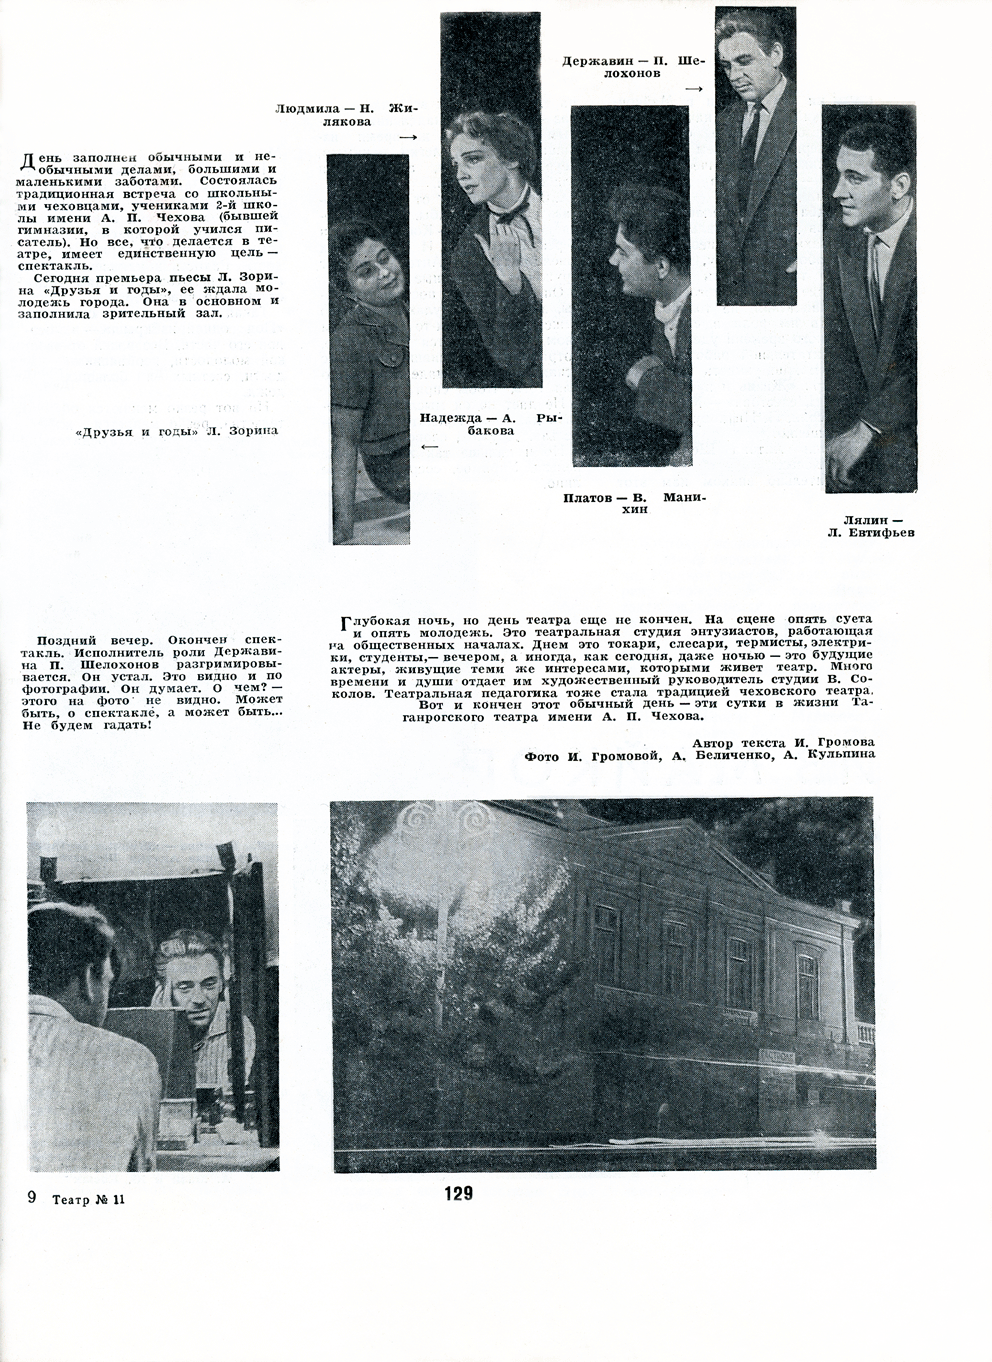 Petr Shelokhonov. Article from journal "Theater" No 11, 1963